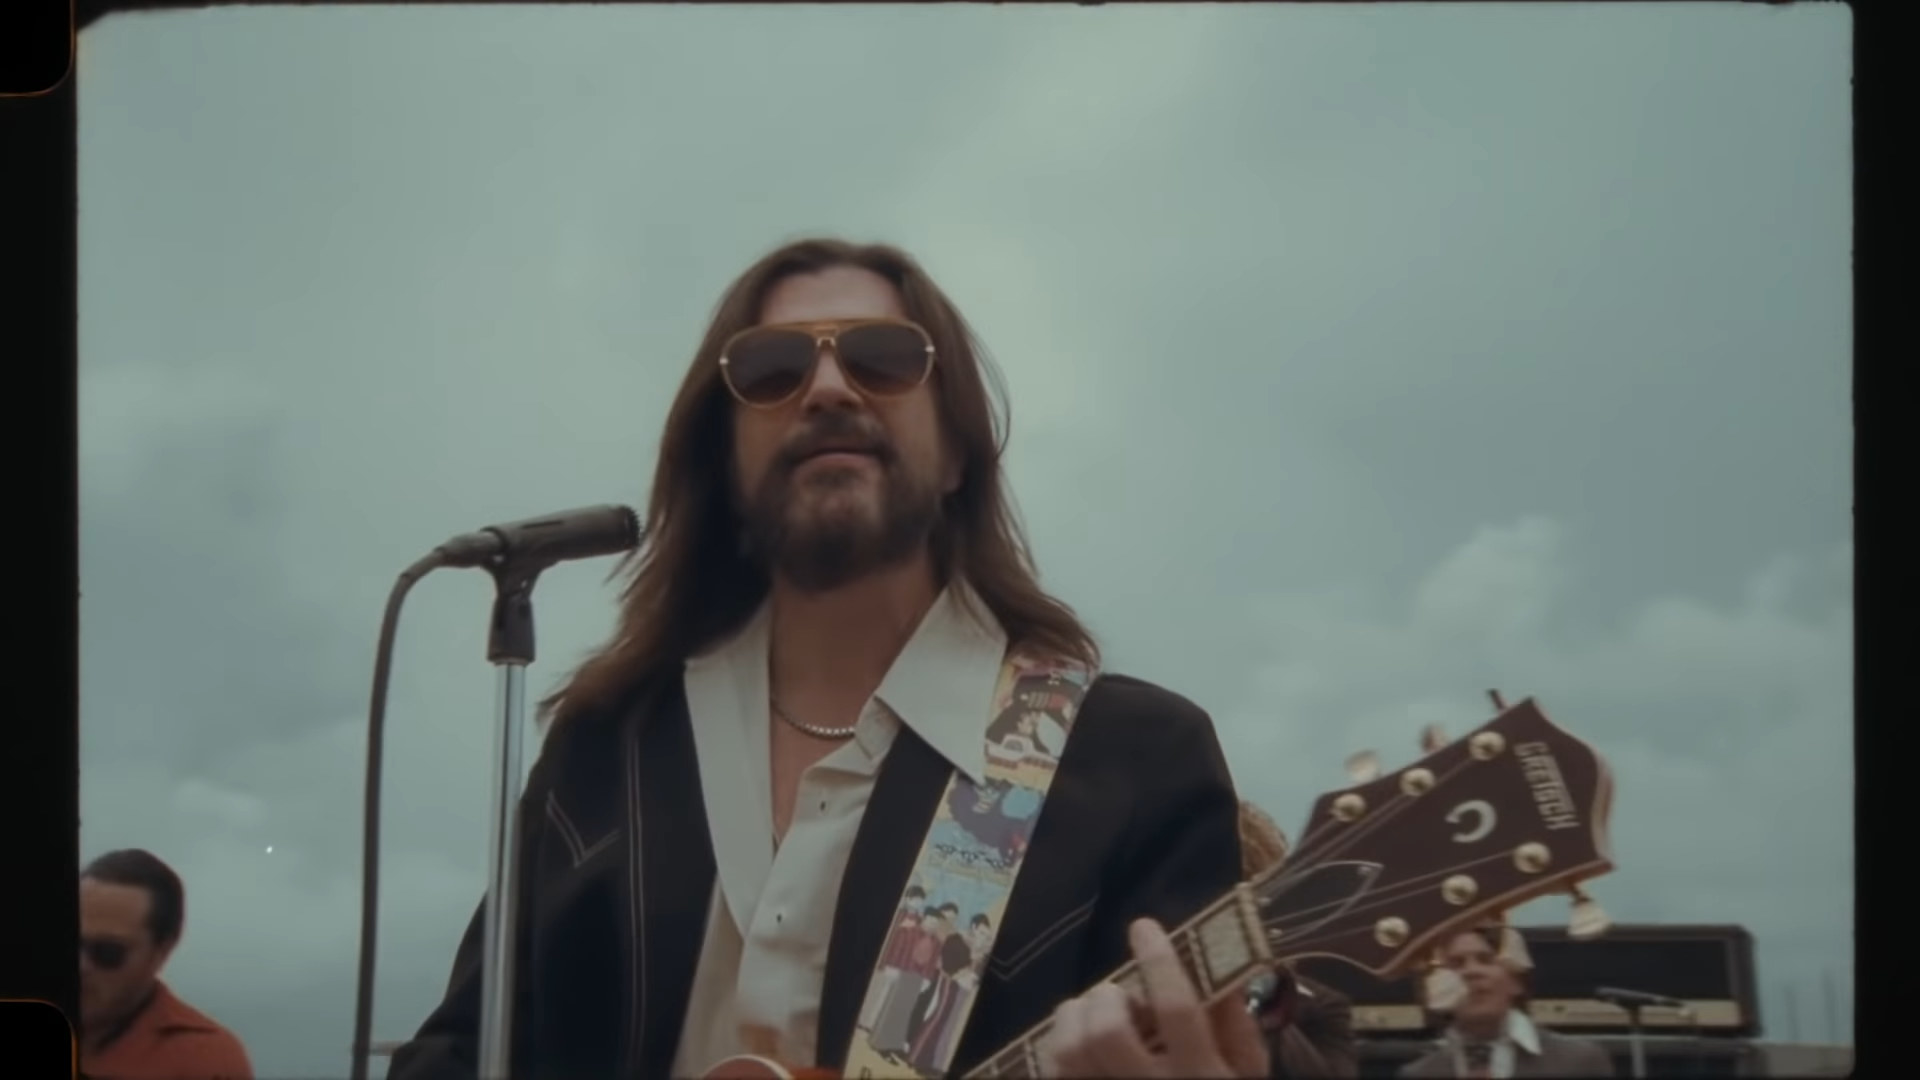 Juanes with long hair, wearing sunglasses, and playing a guitar at a microphone